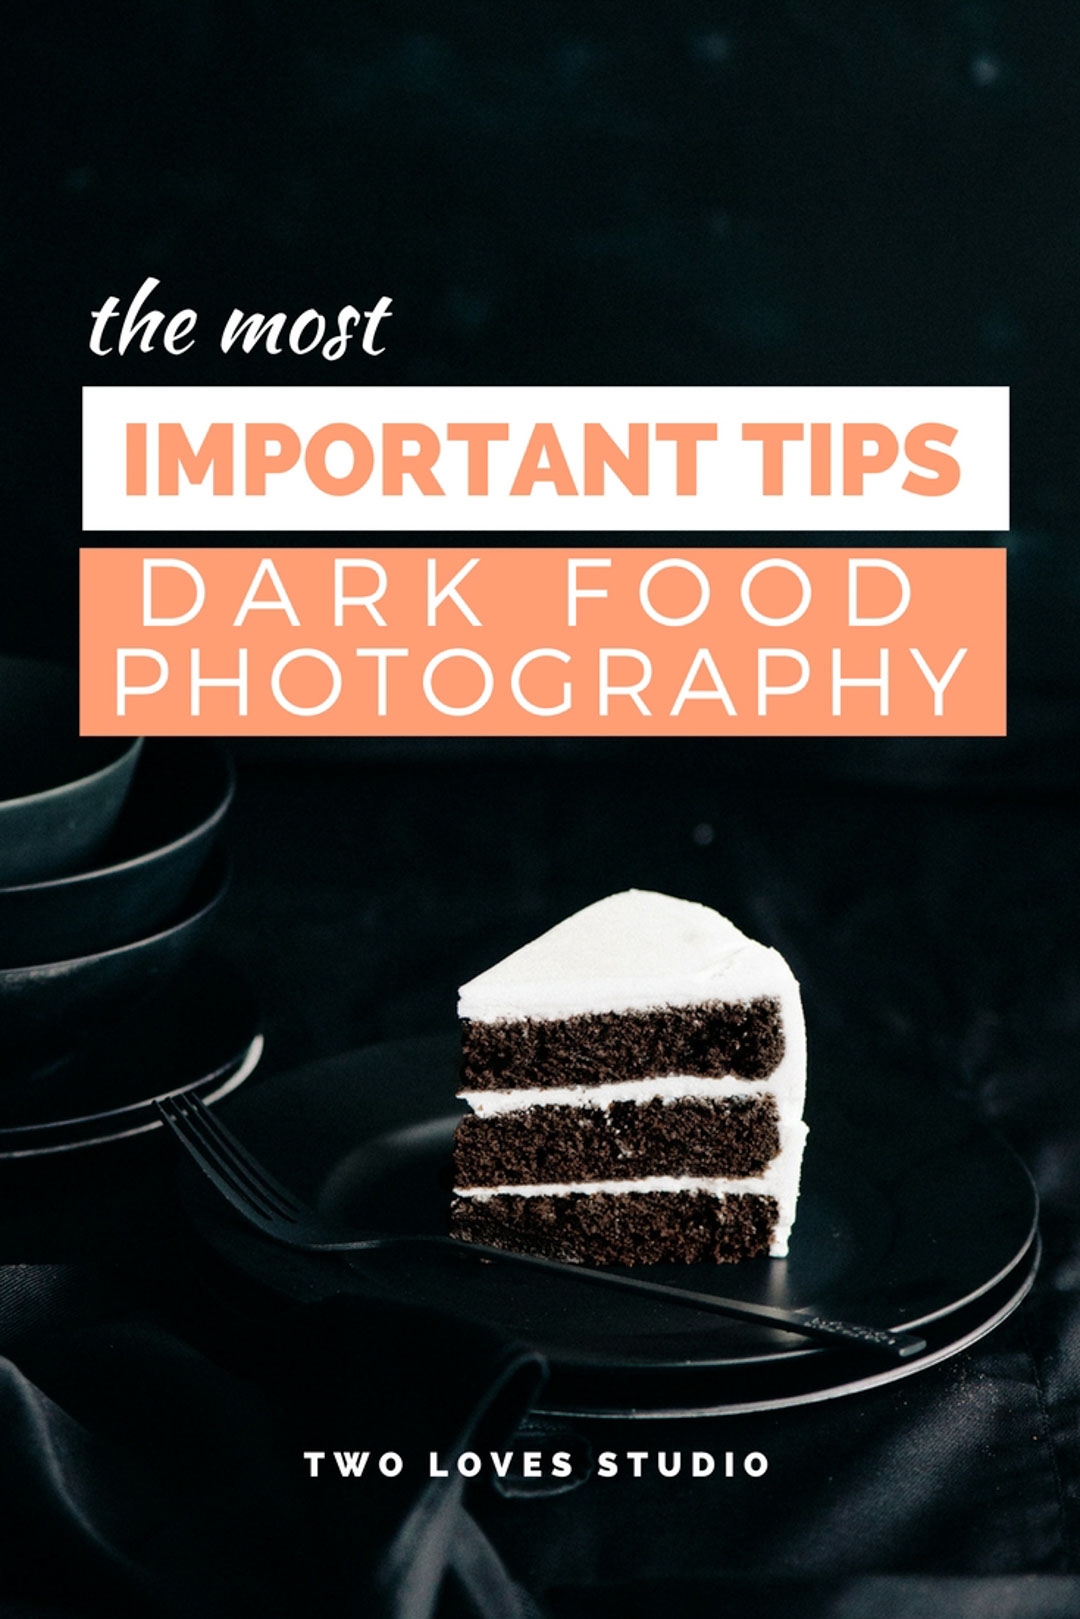 Want to capture dark food photography? Make sure you included these important tips so you can create magic, (and it’s not just about having less light).